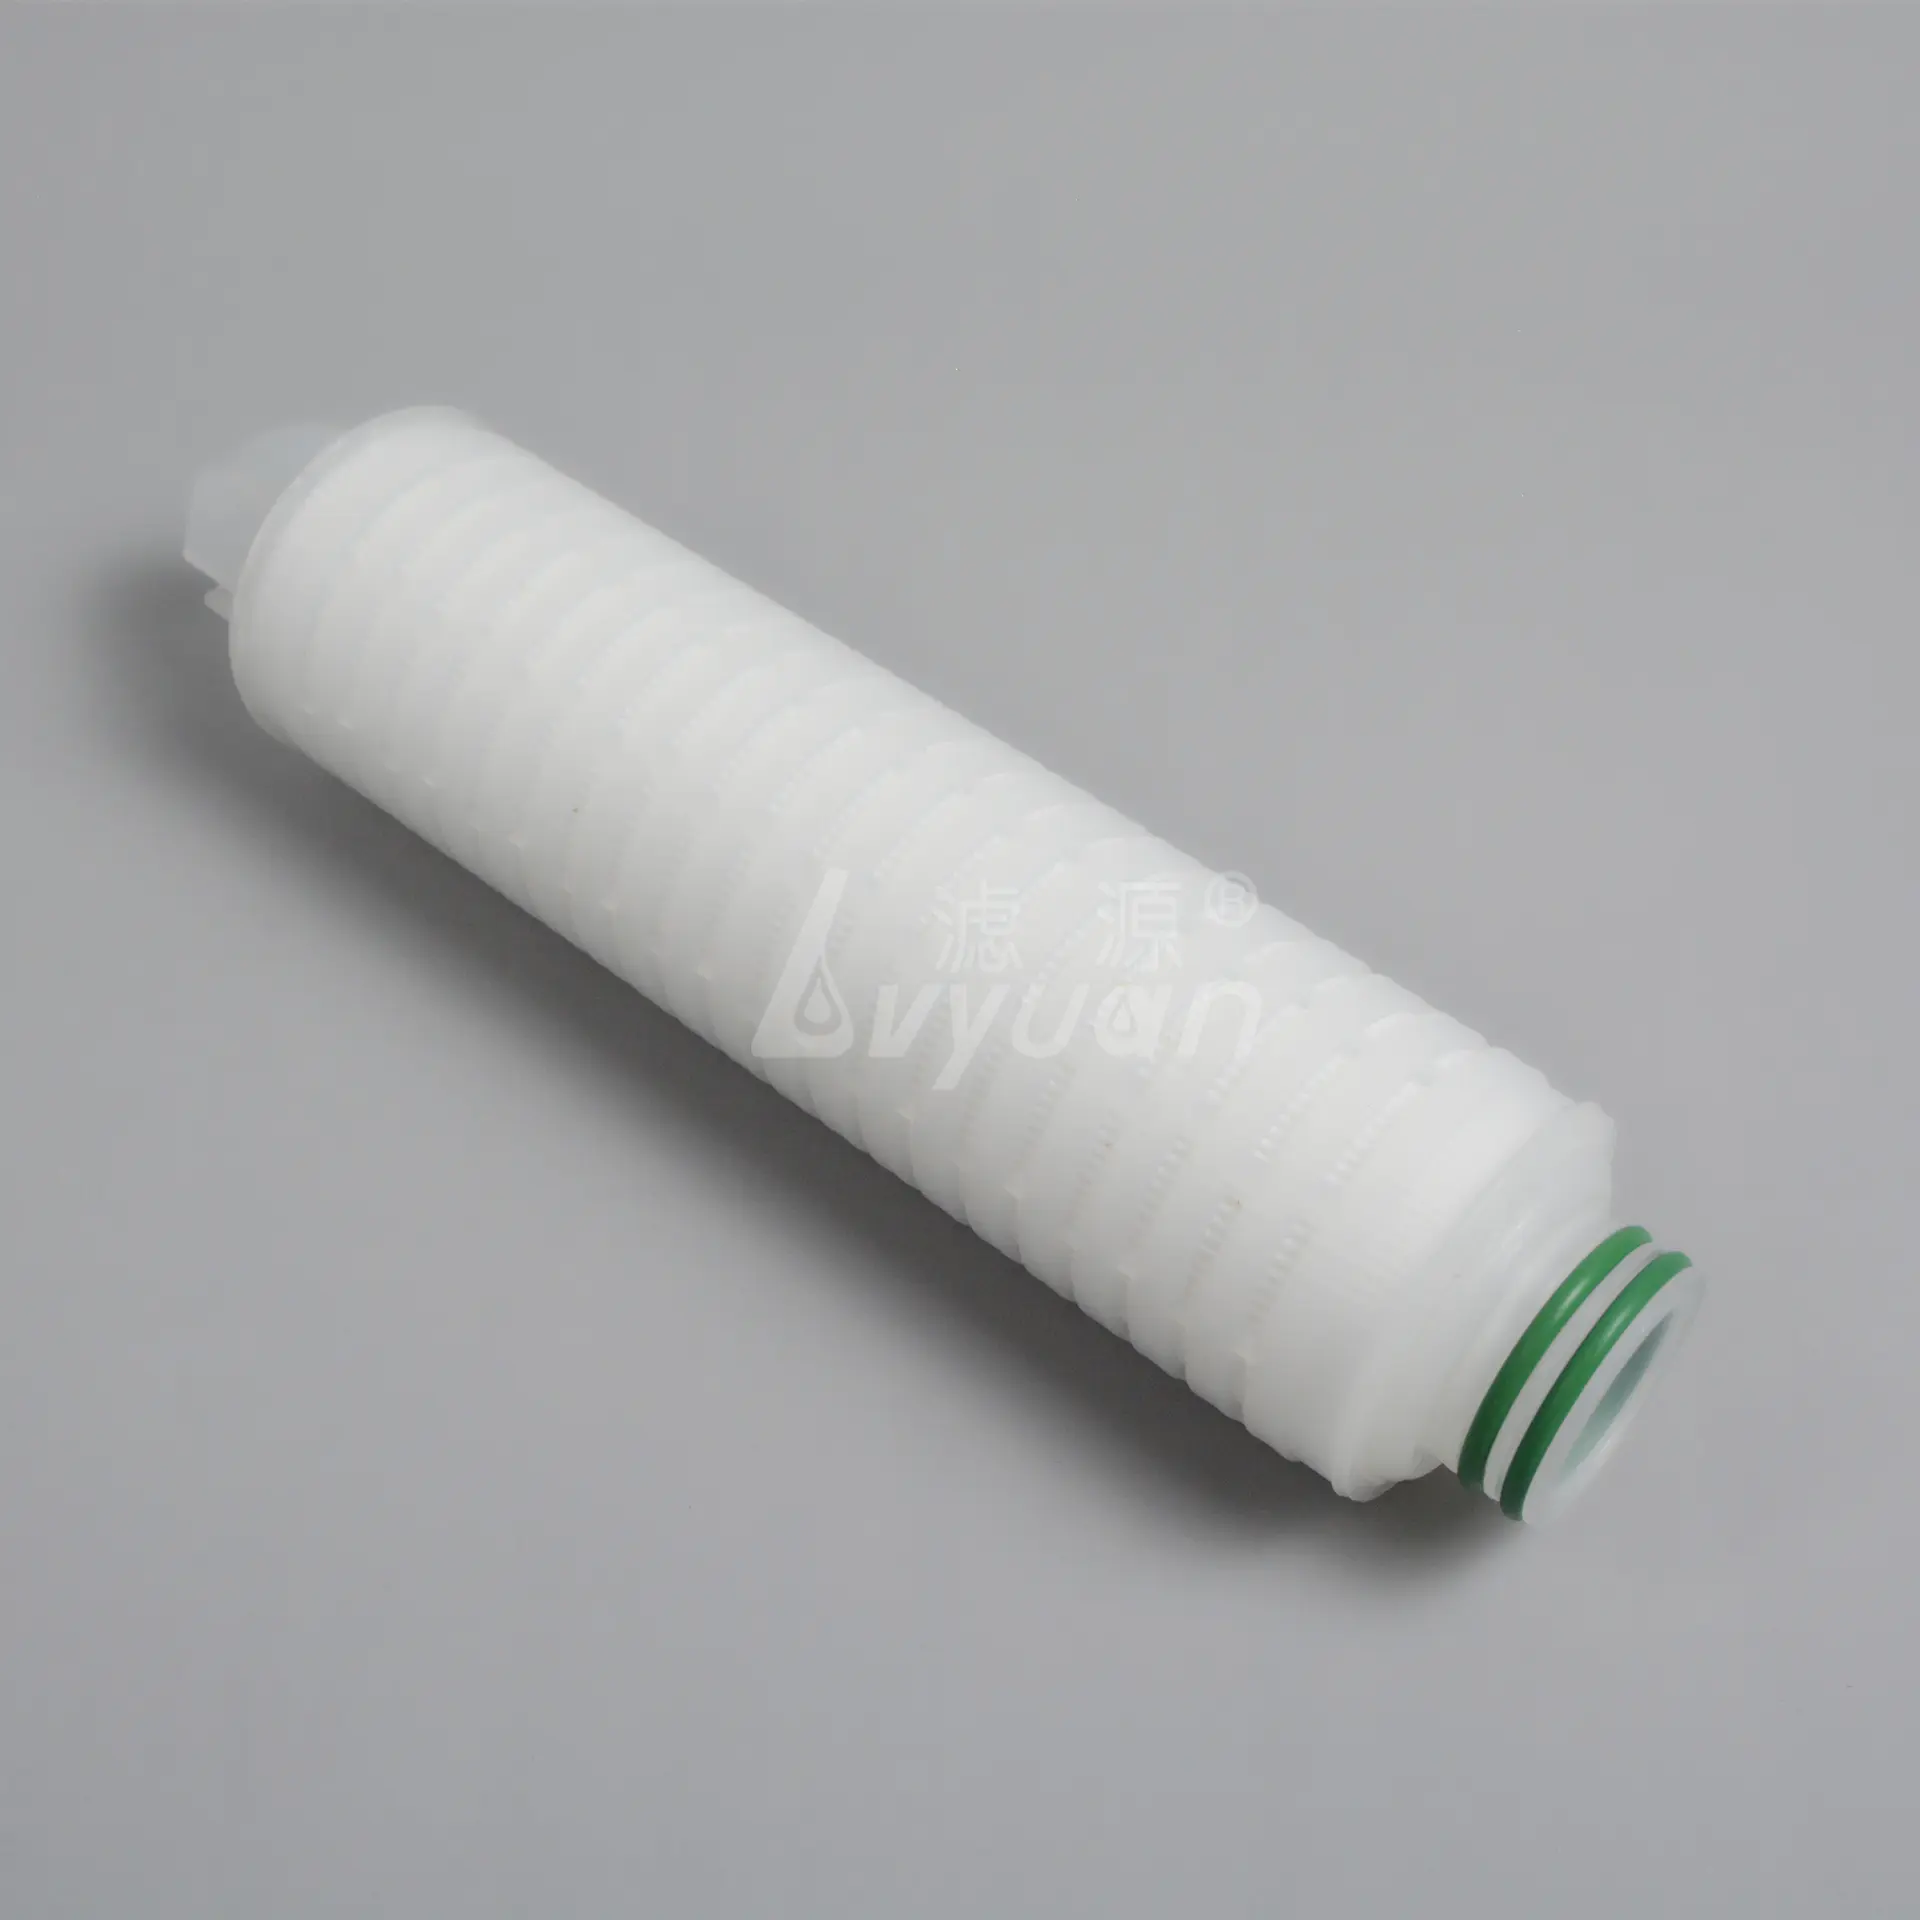 0.2 micron 0.45um 10 inch PTFE membrane pleated filter cartridges for respiratory vent filtration